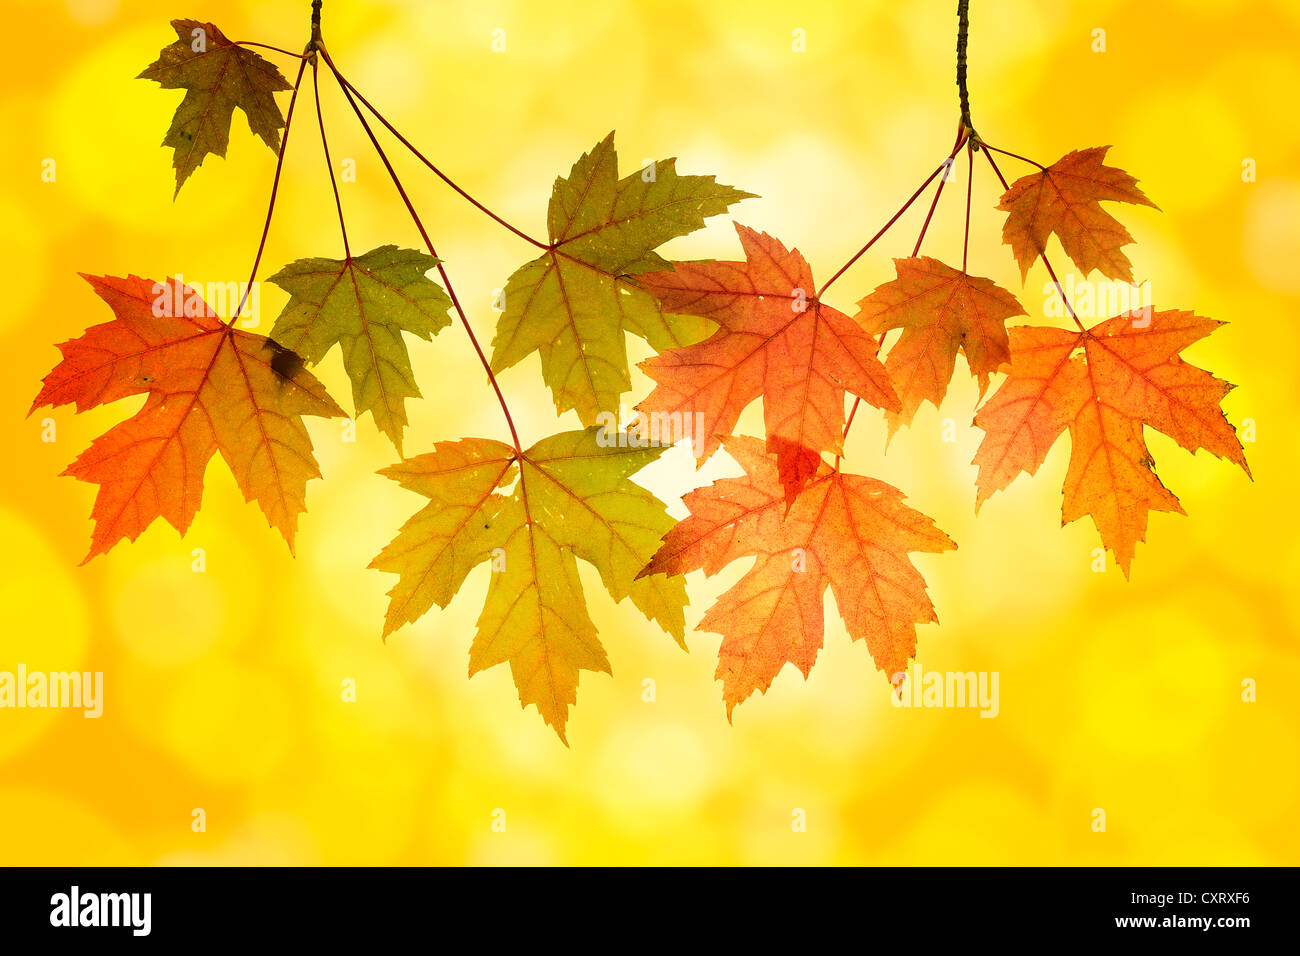 Maple Tree Branches with Leaves with Blurred Background in Autumn Stock Photo